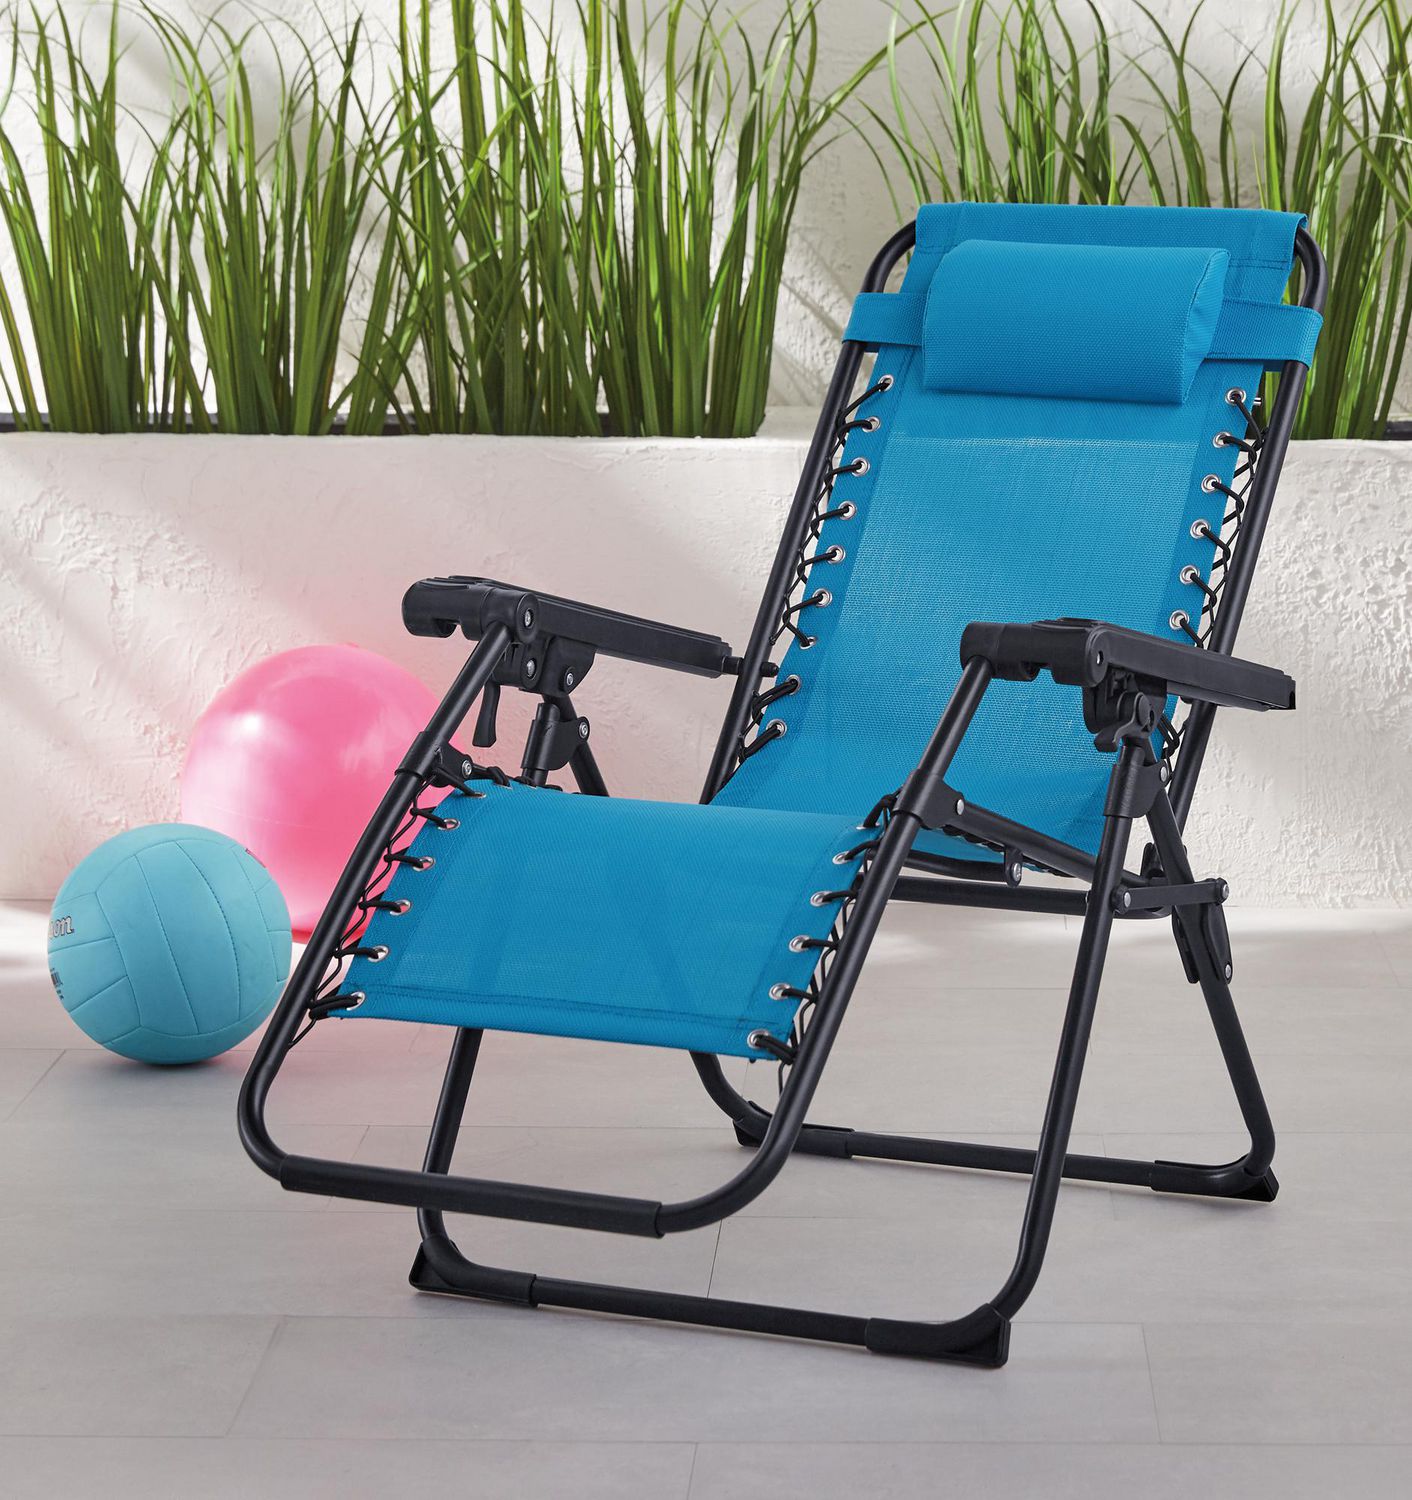 Jeco Oversized Zero Gravity Chair with Sunshade and Drink Tray